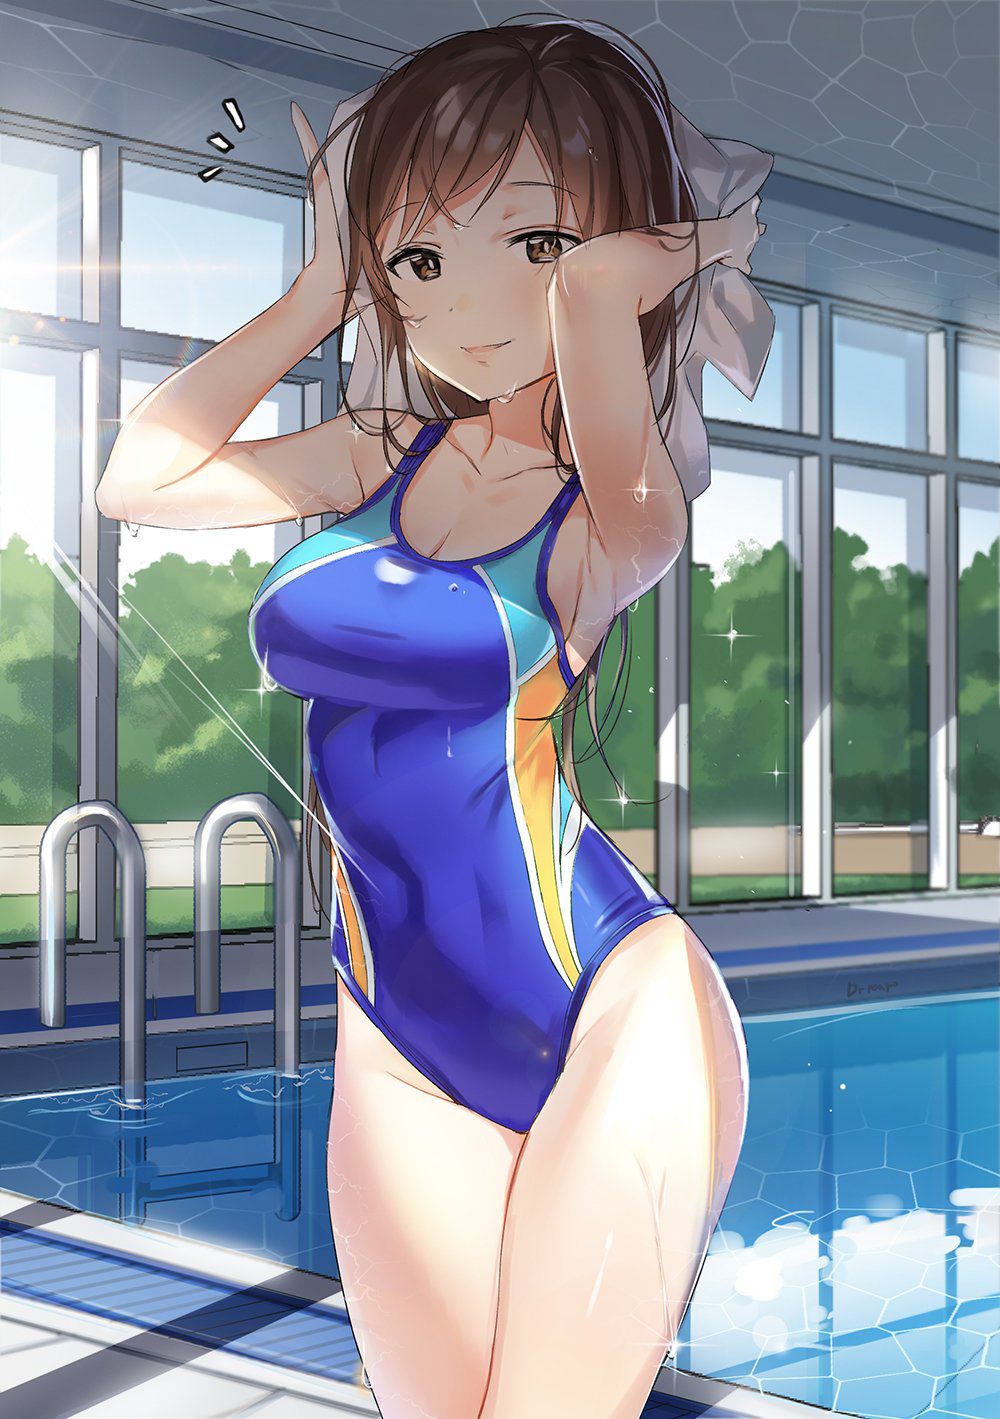 Isn't it too much of a swimming suit that the full body becomes apparent? 9